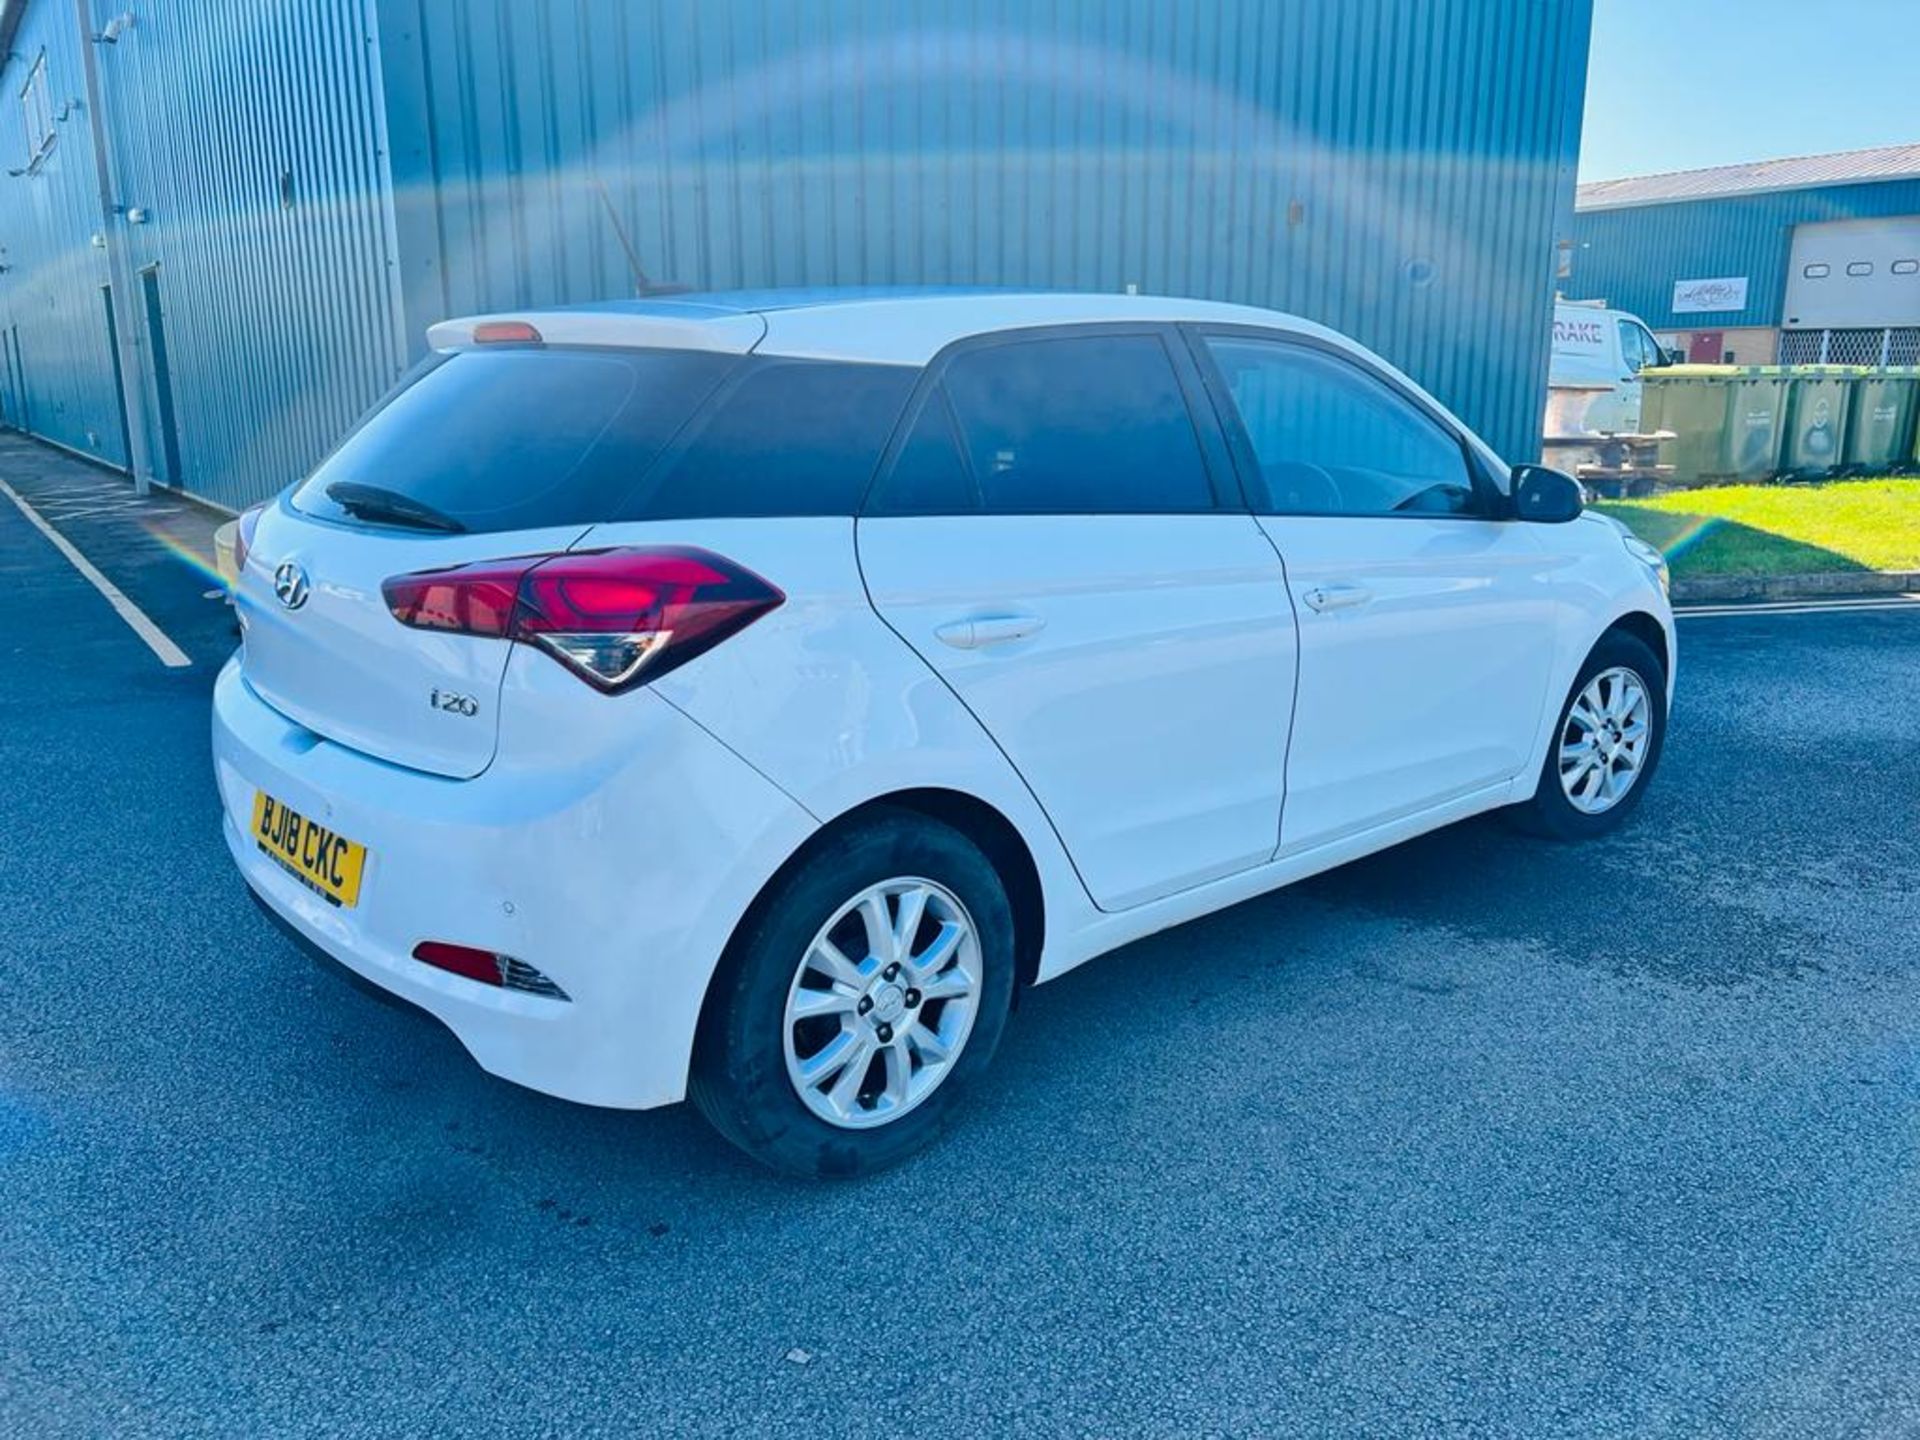 (RESERVE MET)Hyundai i20 1.4 CRDI 90 Special Equipped 2018 18 Reg - Euro 6 ULEZ Compliant - AIr Con - Image 7 of 20